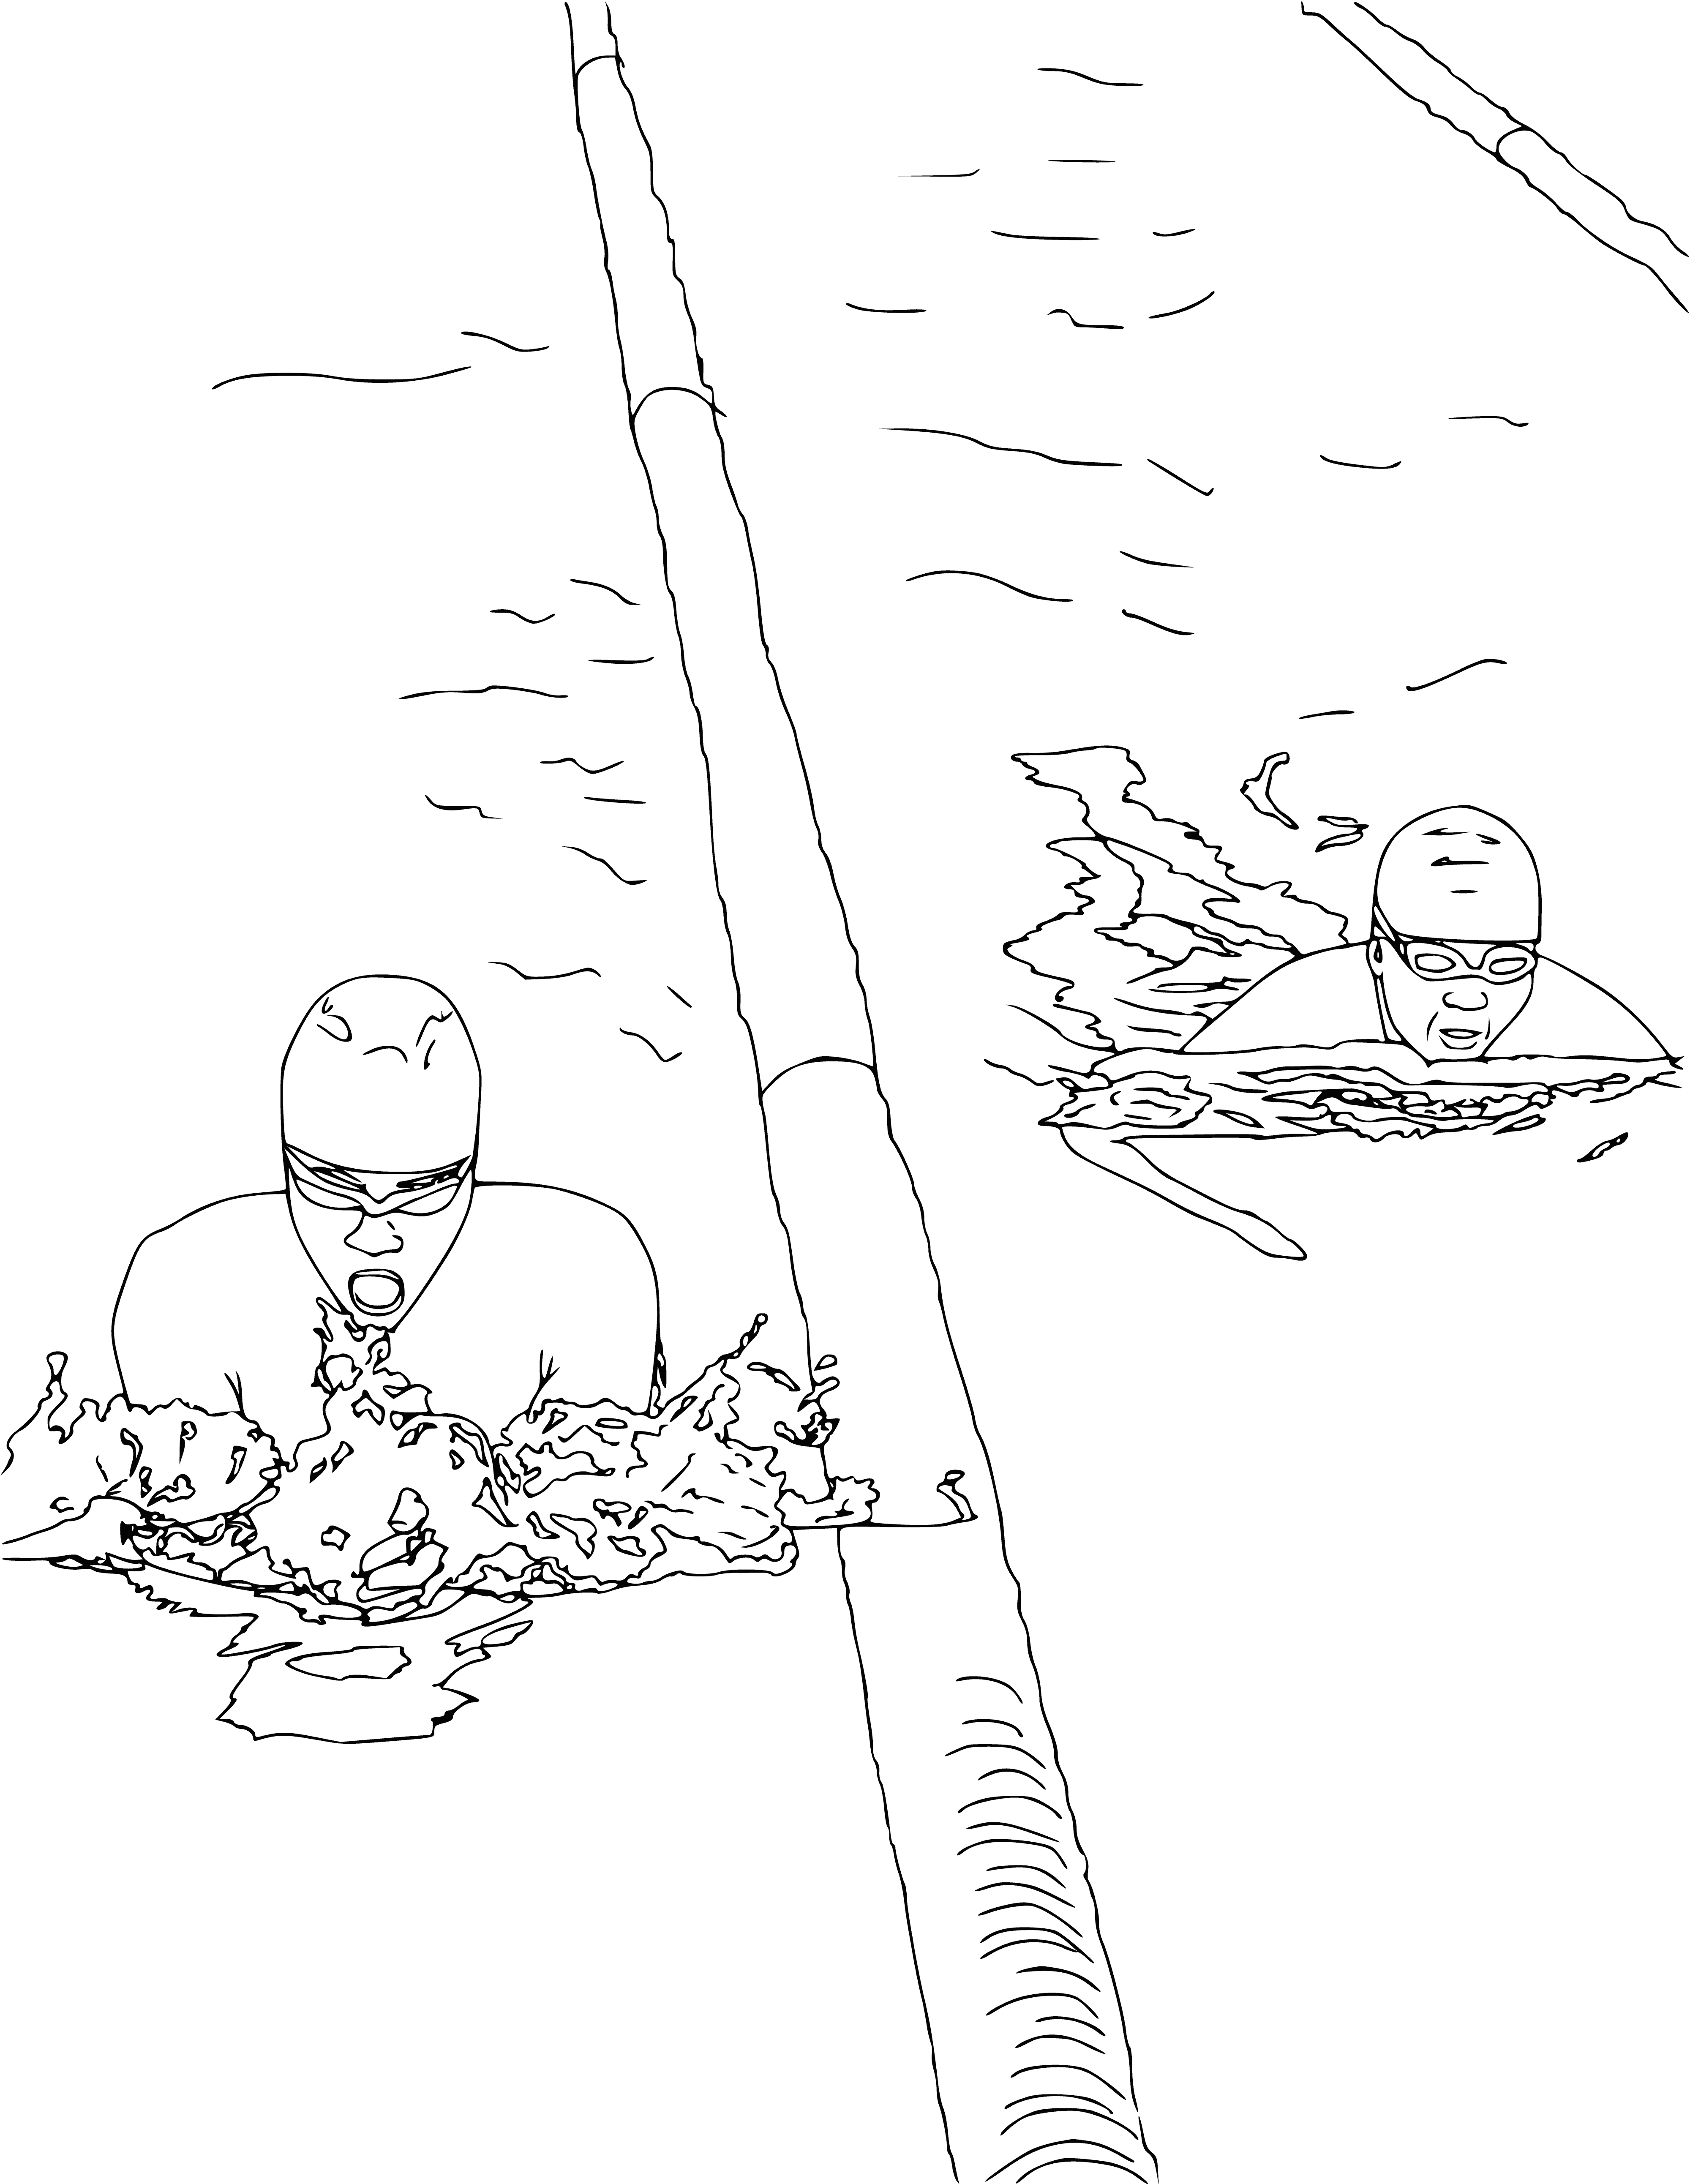 coloring page: Man swimming in black swimsuit, black cap, doing laps in the pool.